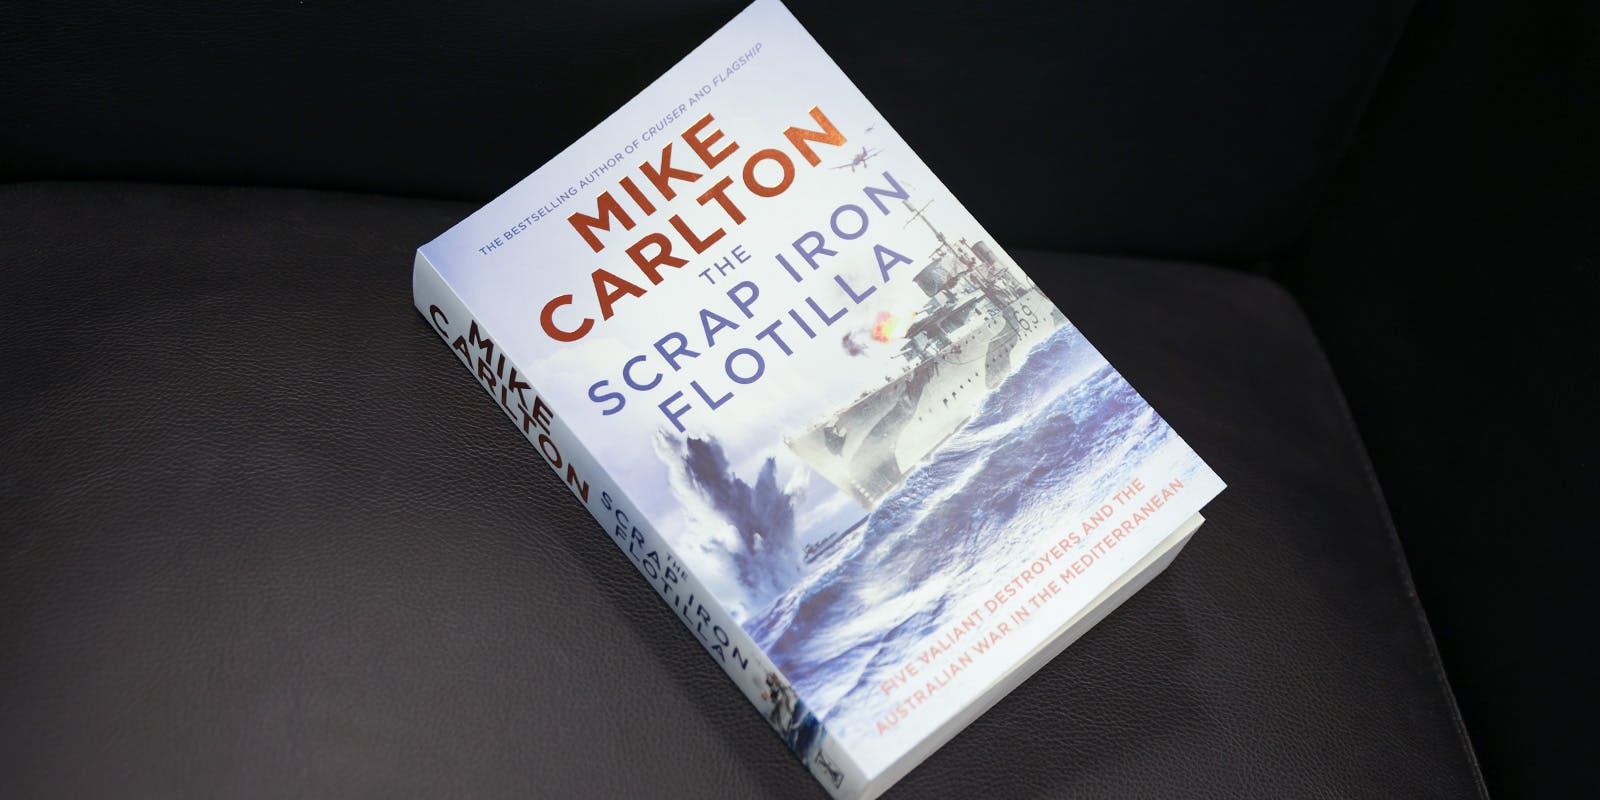 Mike Carlton shares the book that inspired his love of naval history